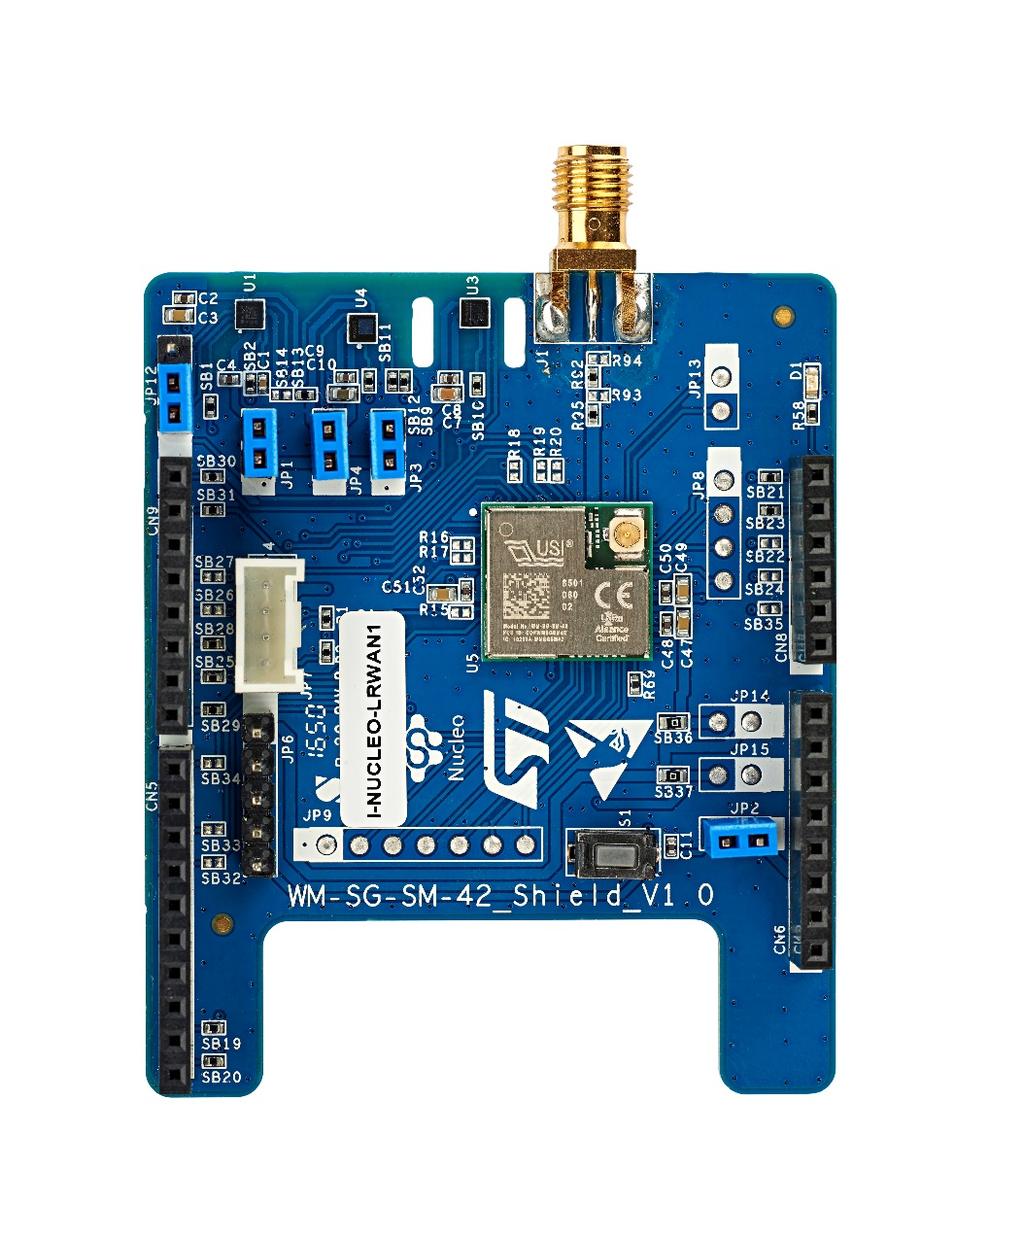 New hardware tool 26 I-NUCEO-LRWAN1: USI STM32 Nucleo expansion board for LoRa SMA antenna